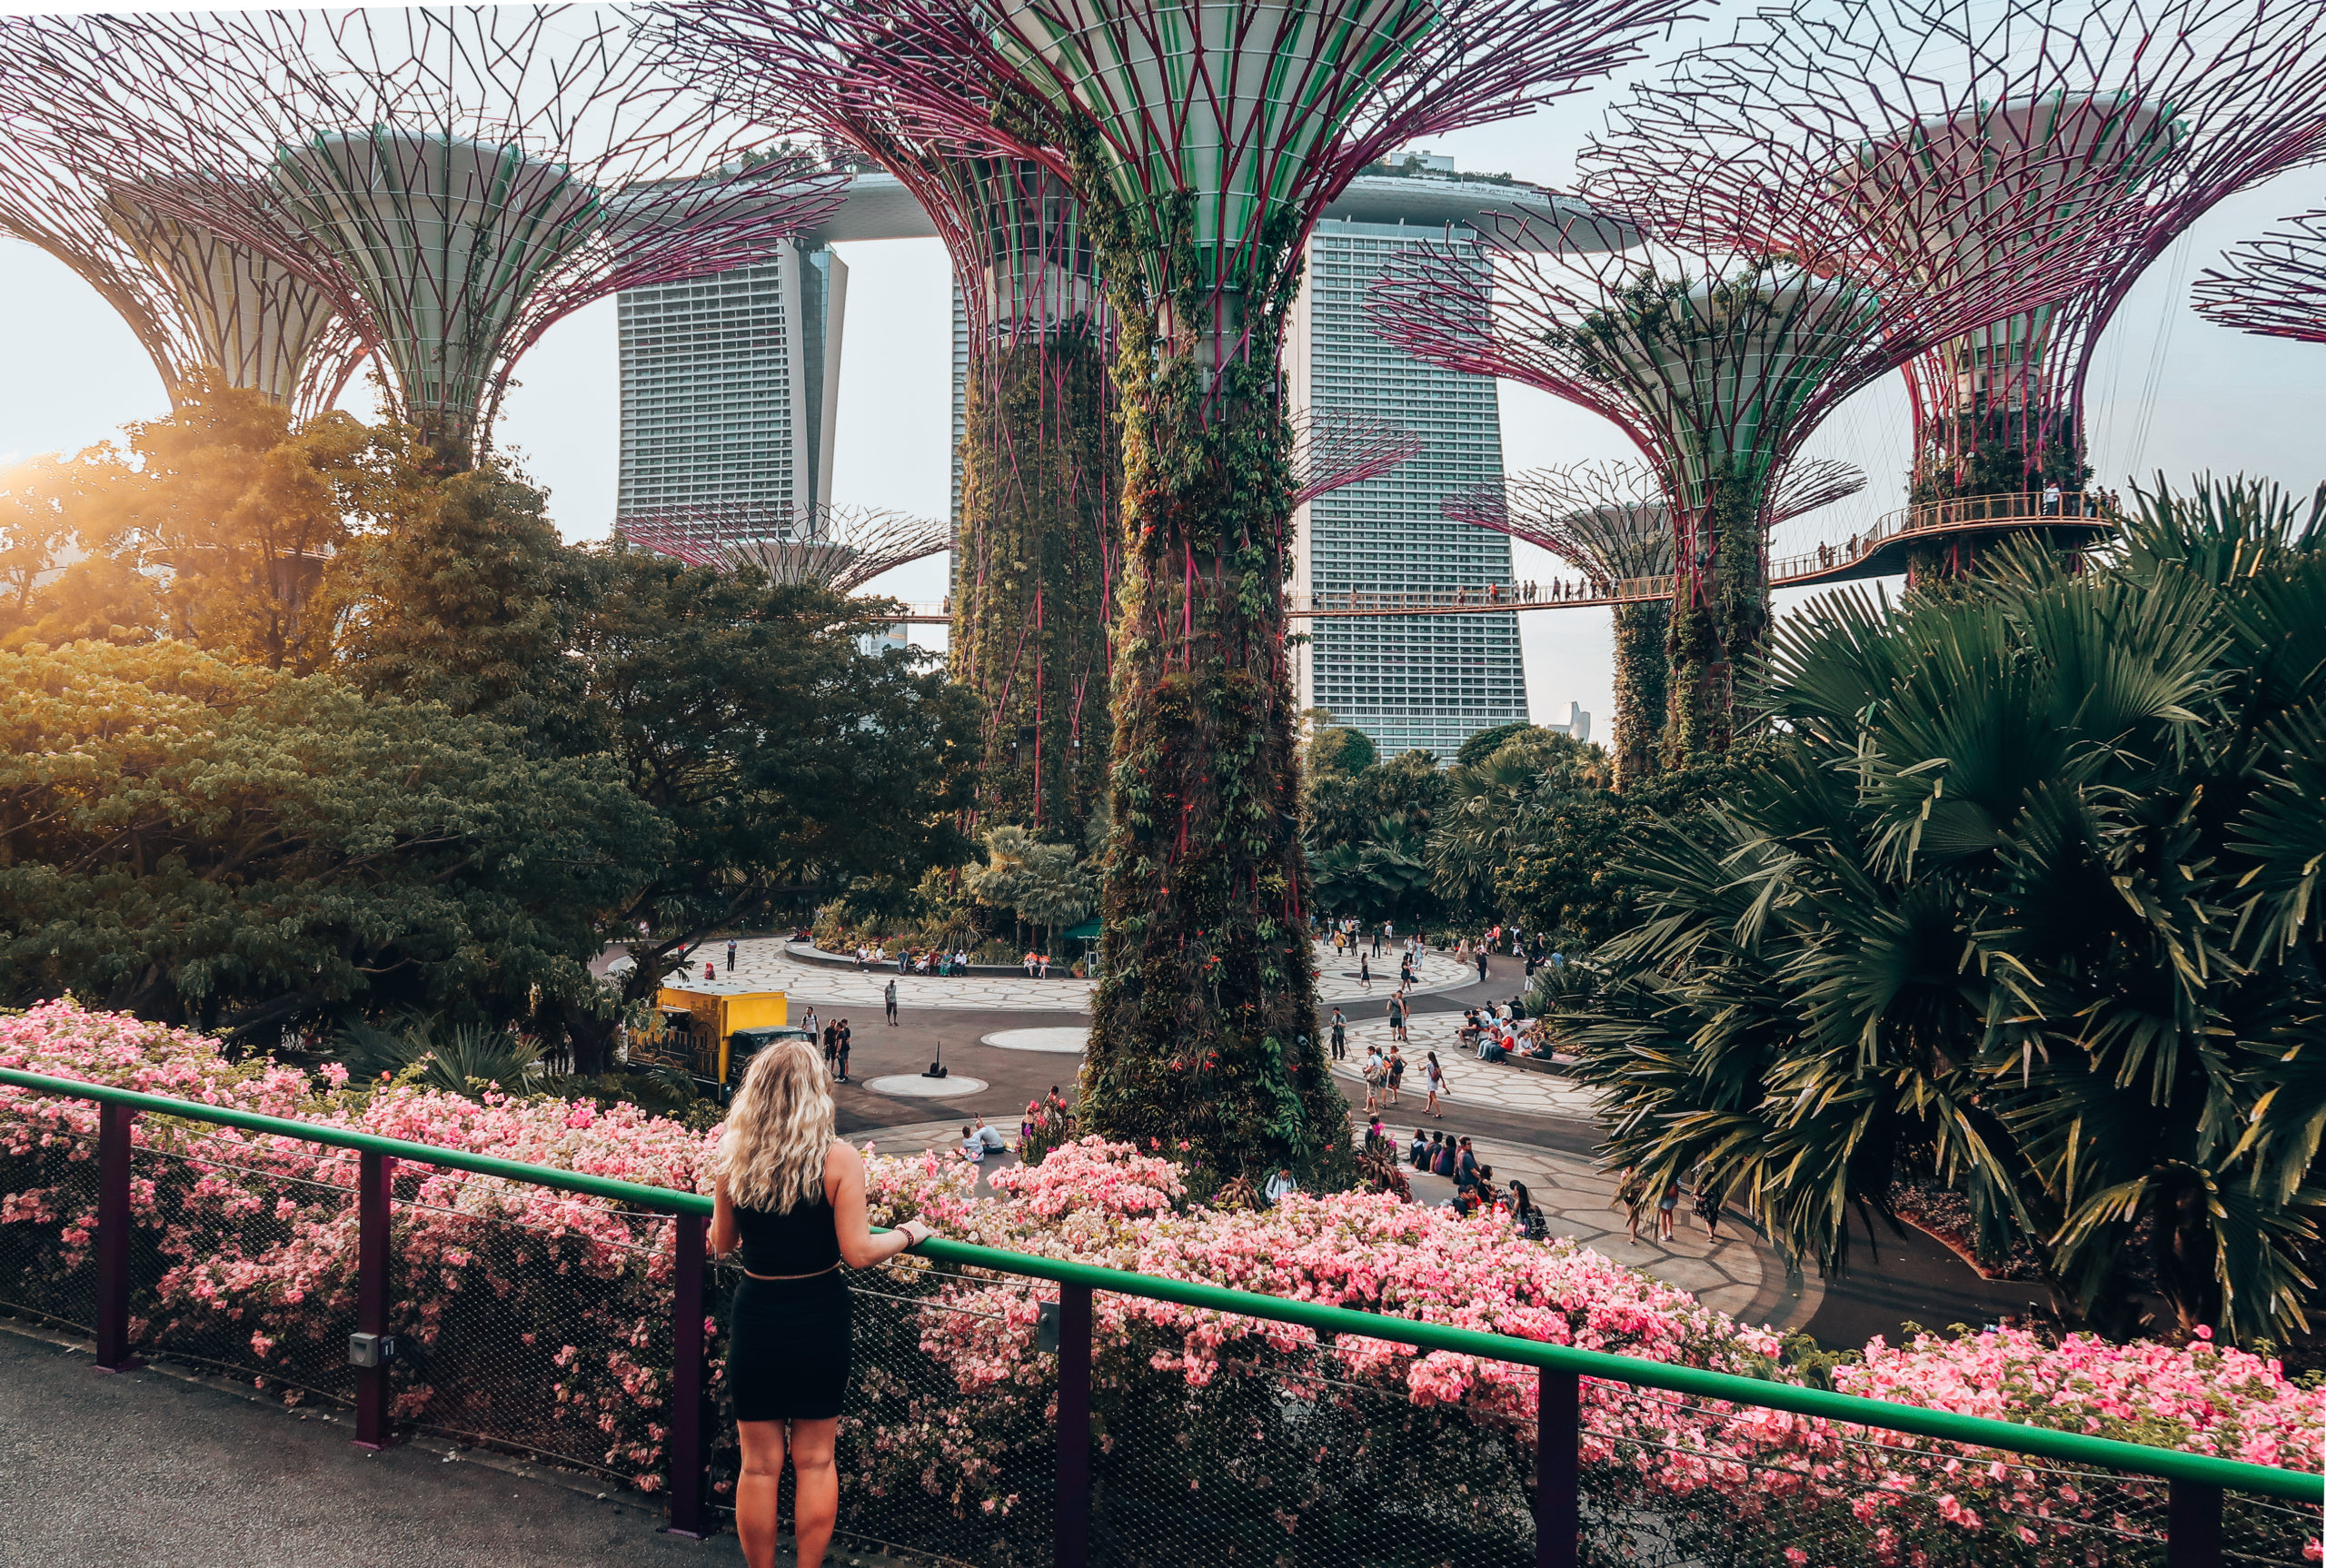 Visiting the Gardens by the Bay - Supertree Grove at sunset